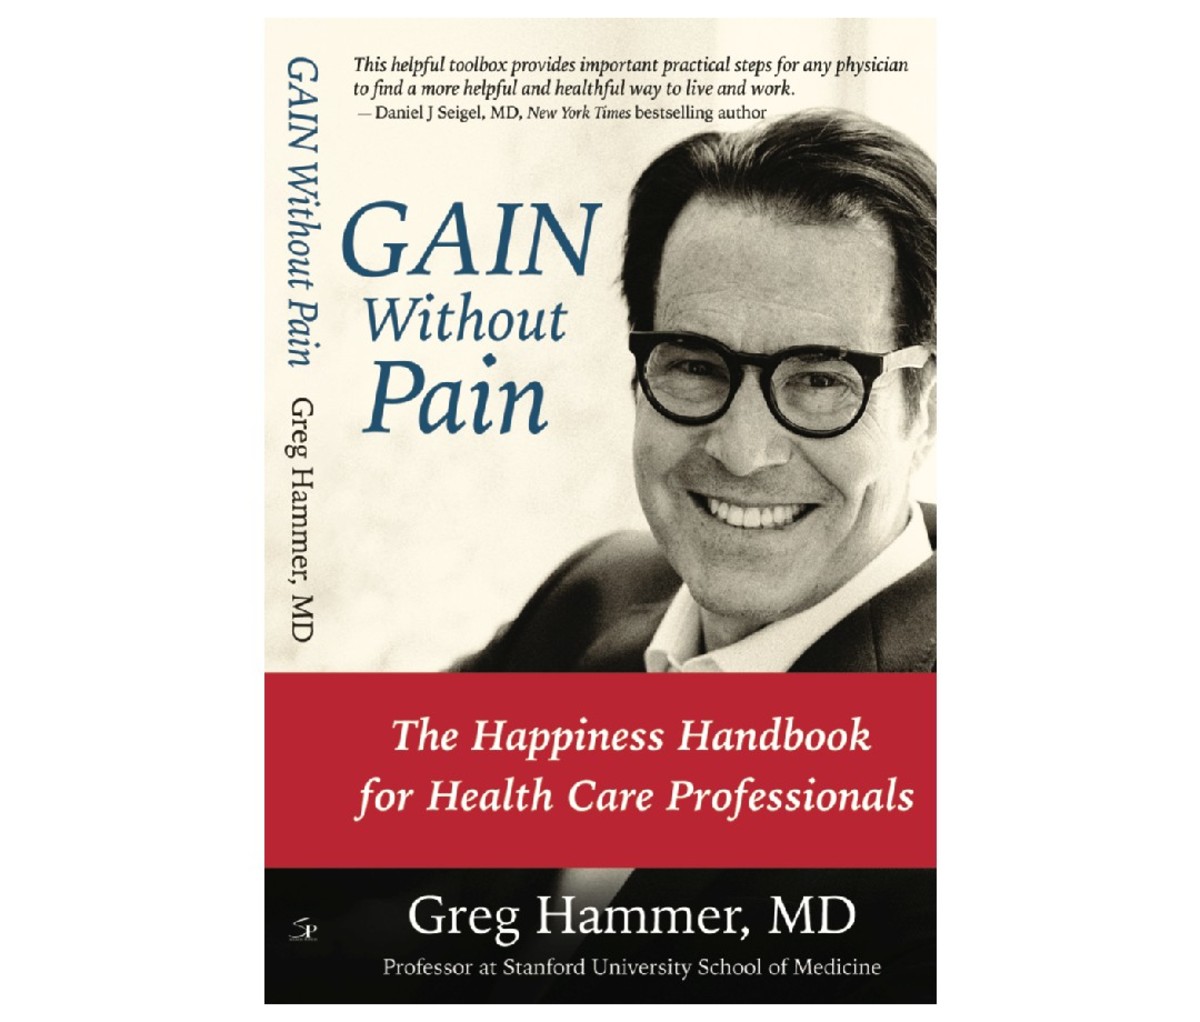 GAIN Without Pain: The Happiness Handbook for Health Care Professionals by Greg Hammer, MD